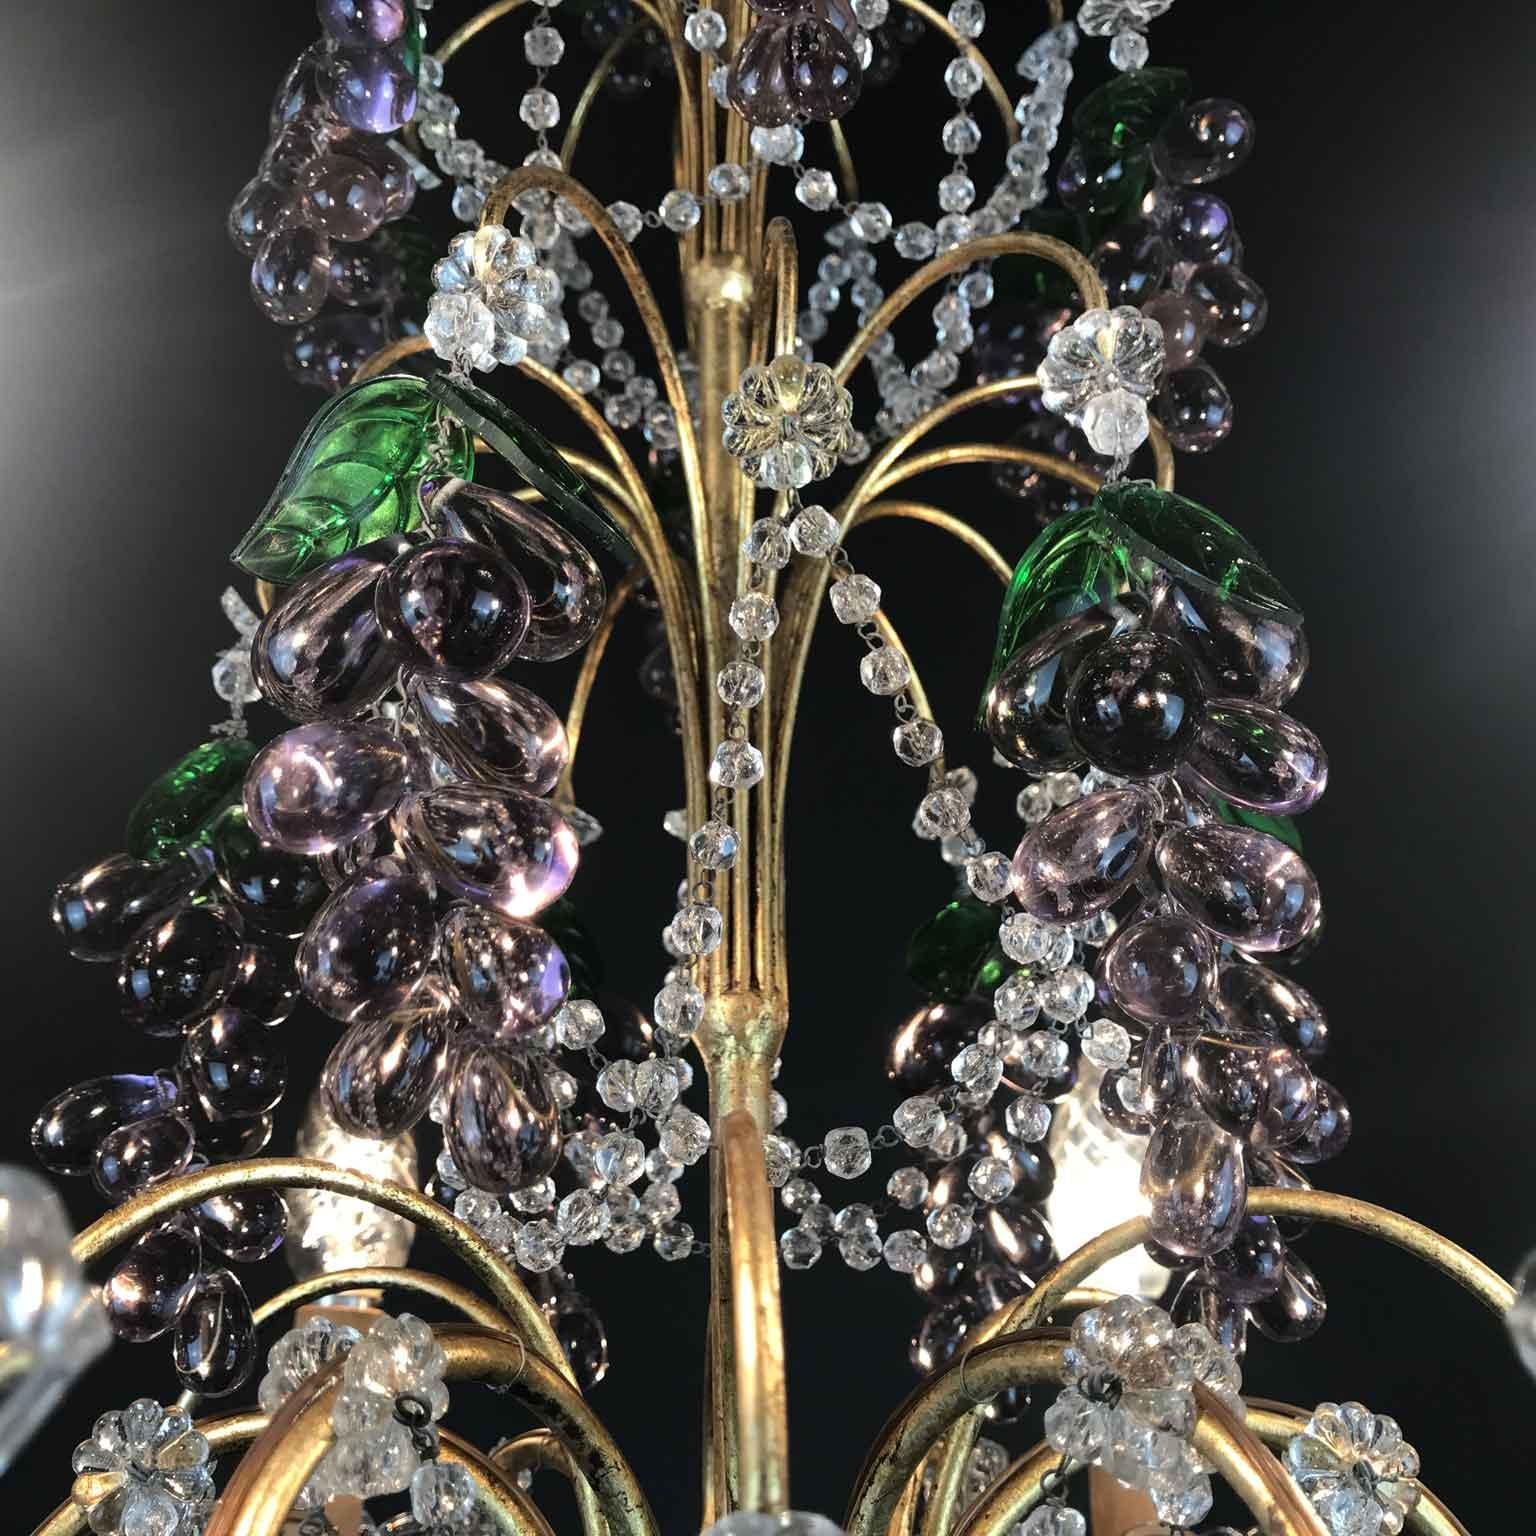 Pair of Mid-20th Century Italian Chandeliers with Purple Murano Glass Grapes 6